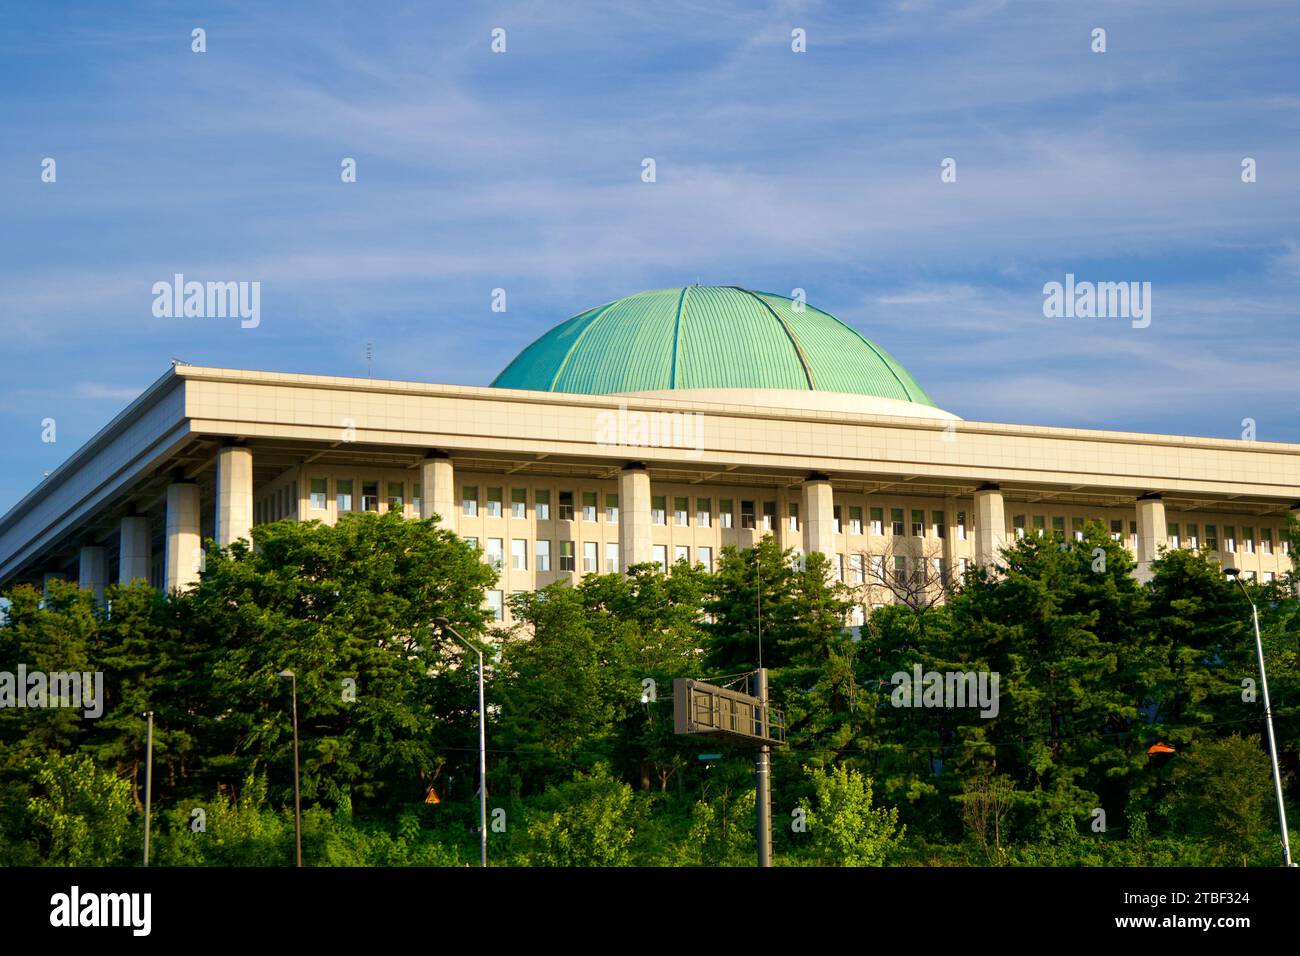 A picture of the National Assembly Building in Yeouido Hangang Park in Seoul, South Korea. Stock Photo